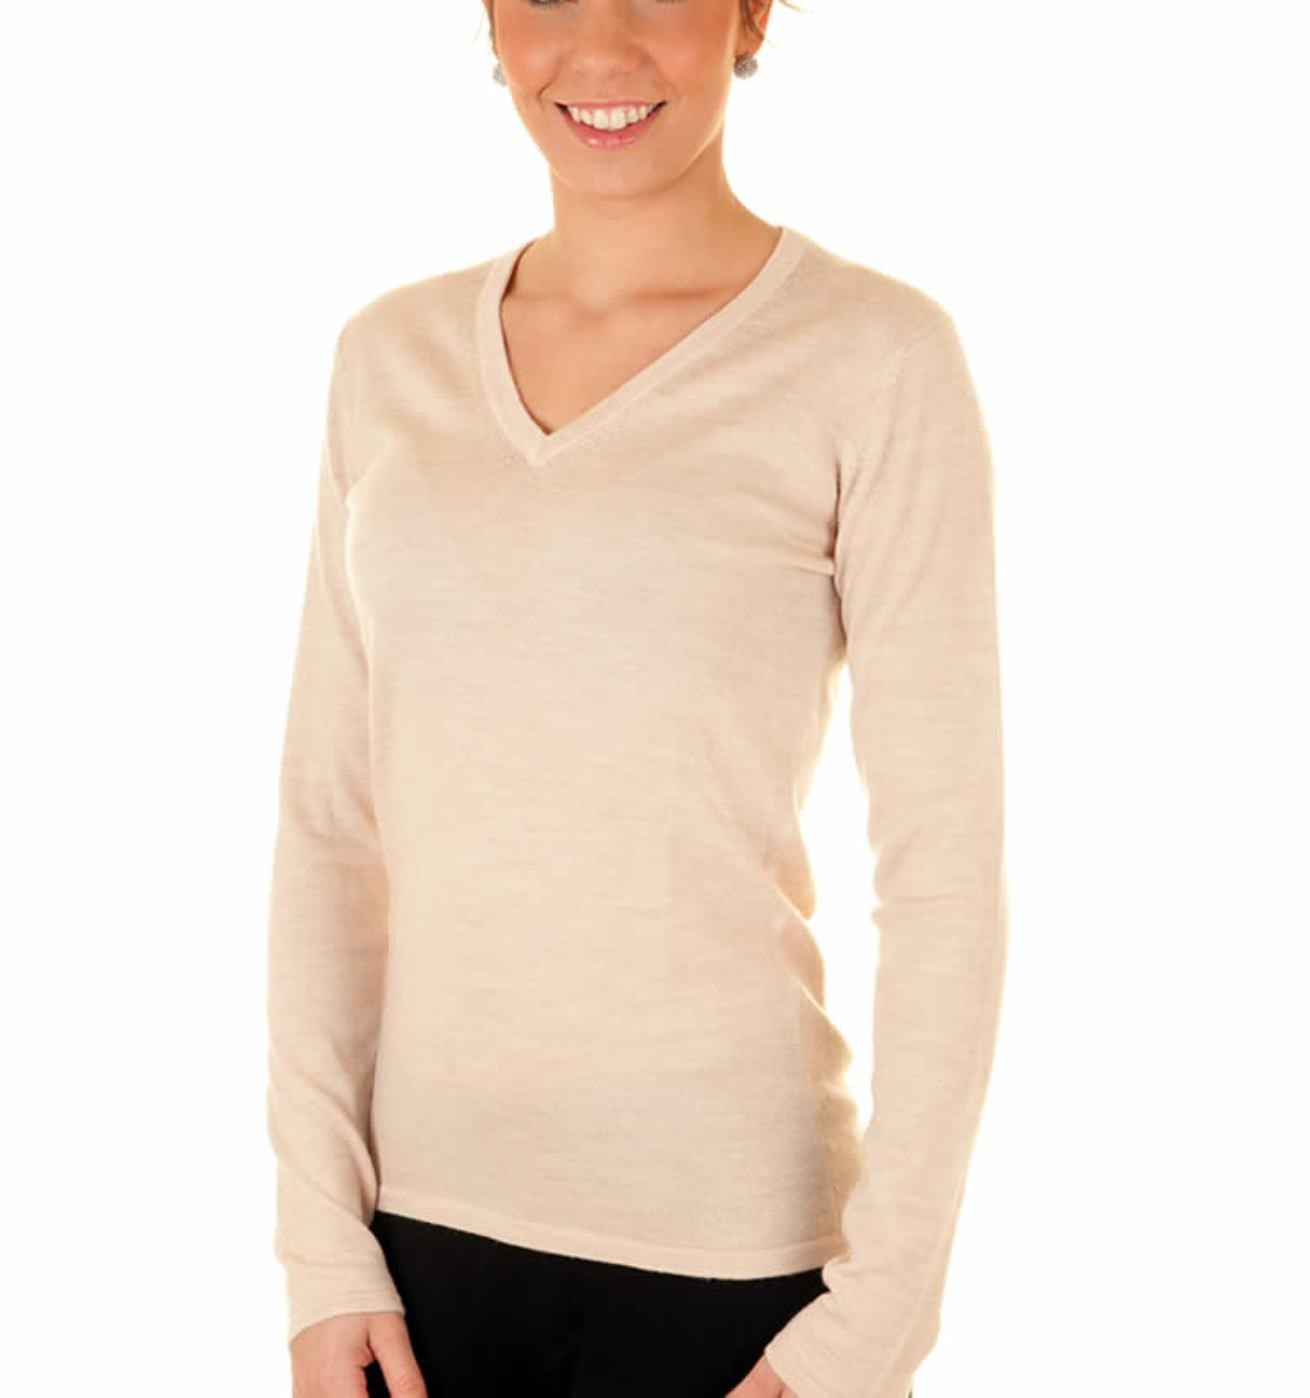 Linen Ladies V-Neck Sweater - 100% Cashmere Made in Scotland